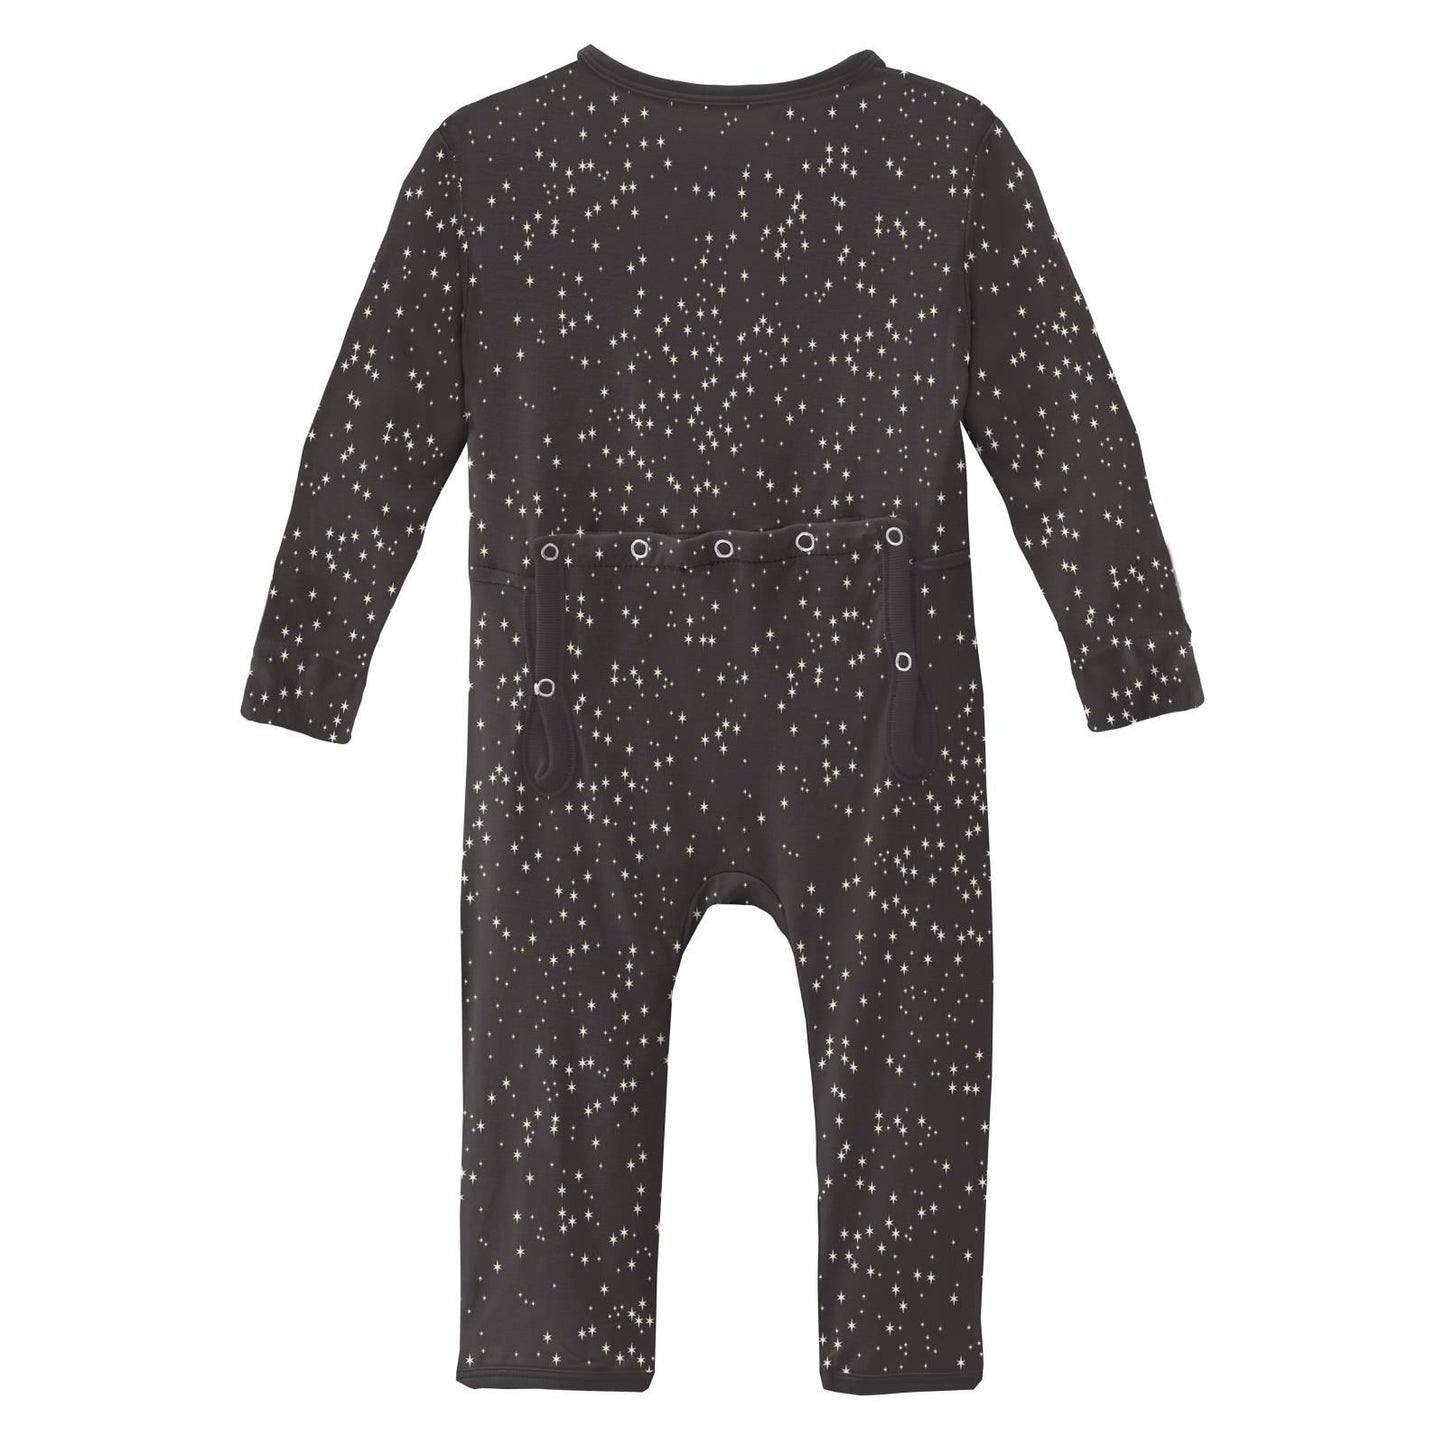 Last One - Size Preemie: Coverall (Snaps/Zipper) - Midnight Constellations